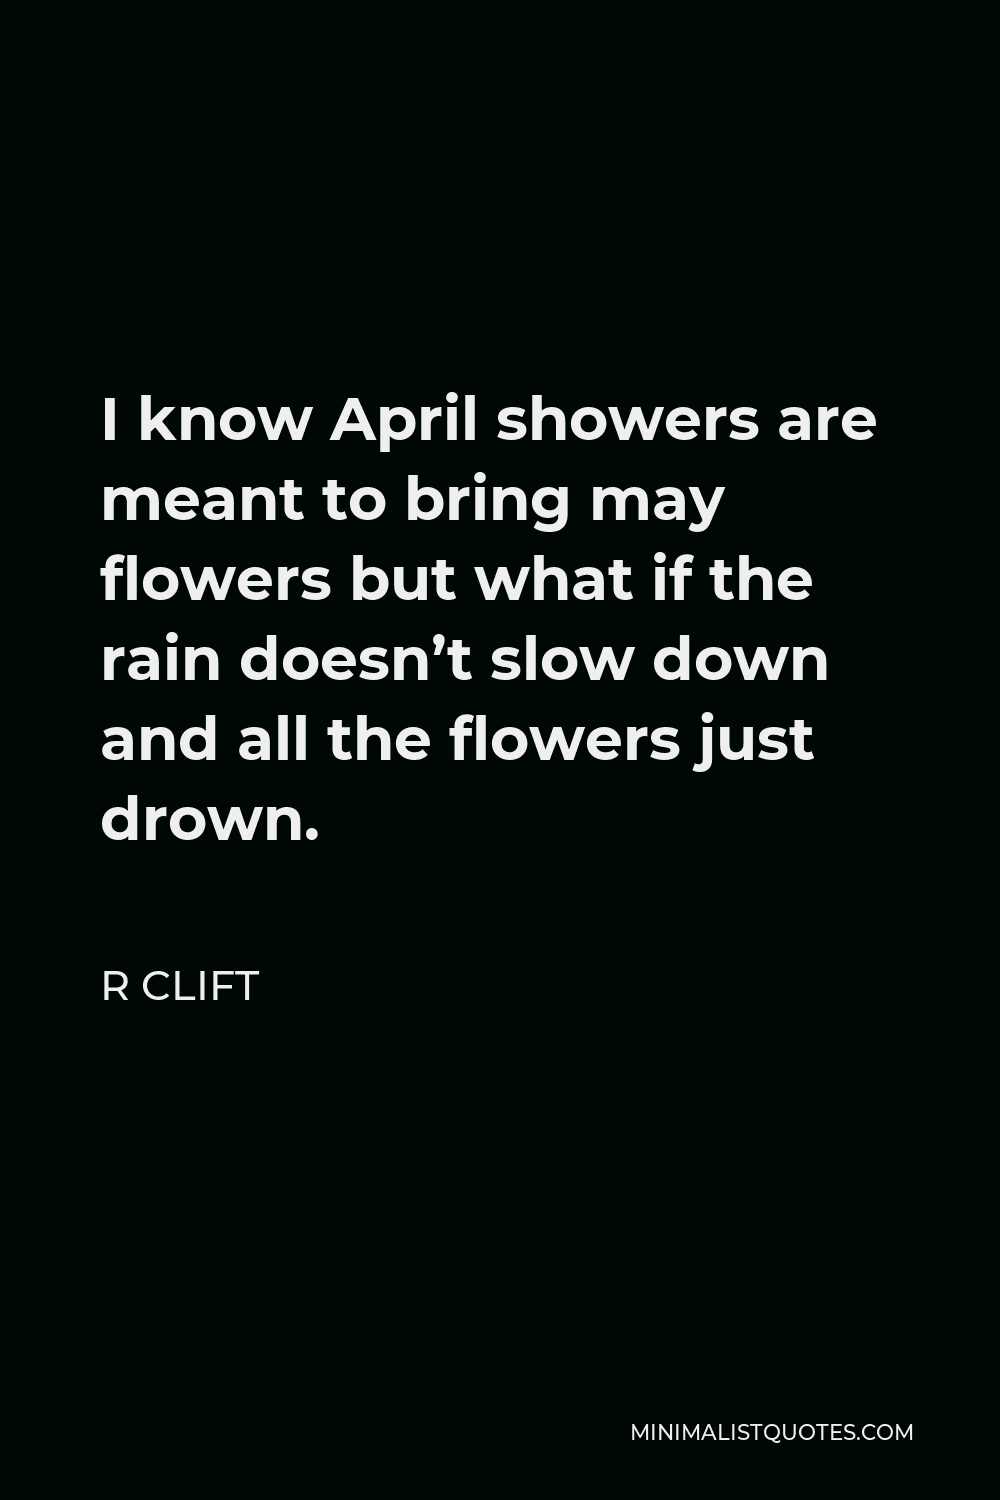 R Clift Quote - I know April showers are meant to bring may flowers but what if the rain doesn’t slow down and all the flowers just drown.